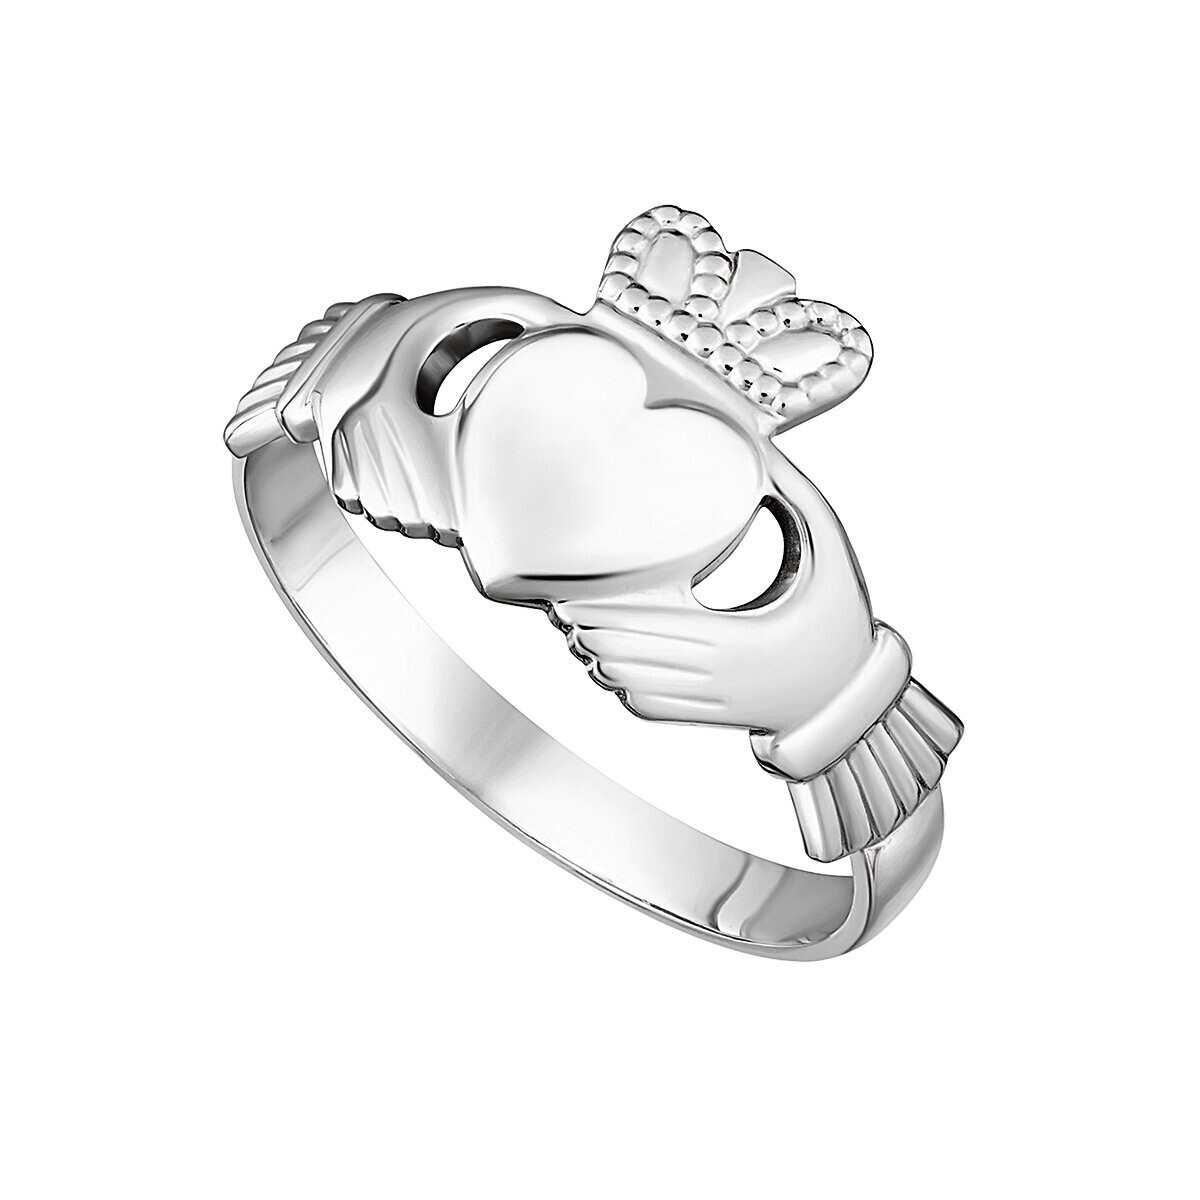 14K White Gold Claddagh Ring, Size: 6